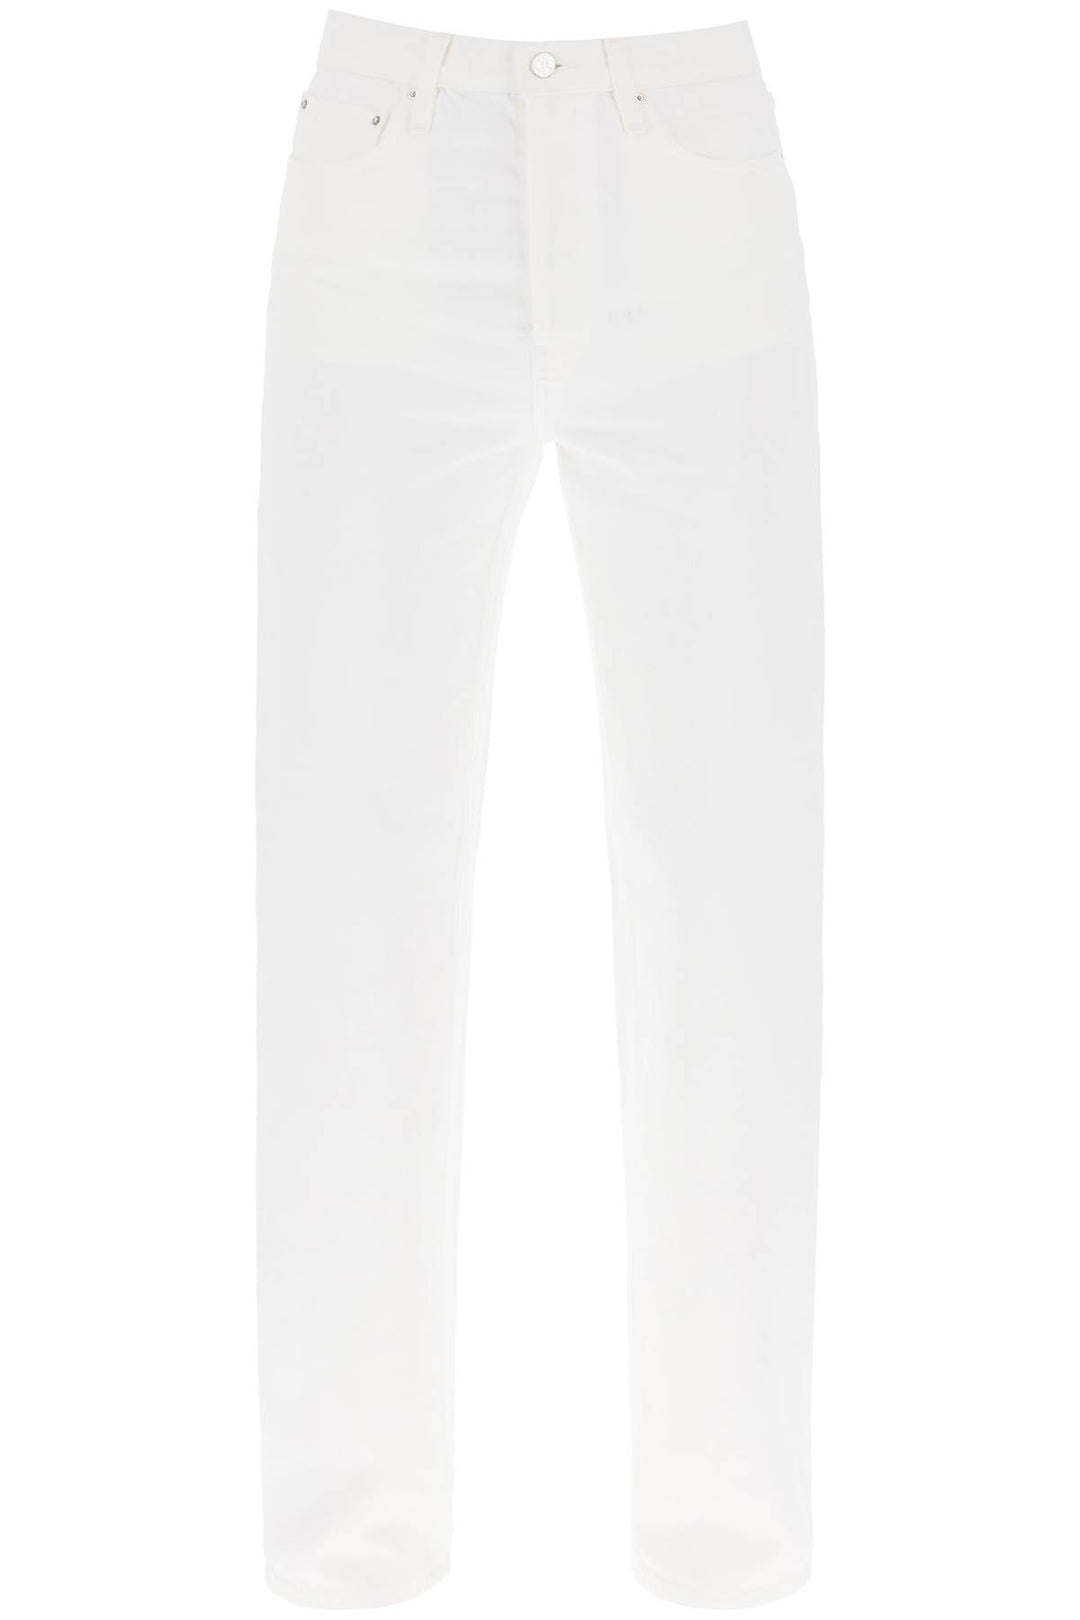 Toteme Straight Cut Loose Jeans   Bianco